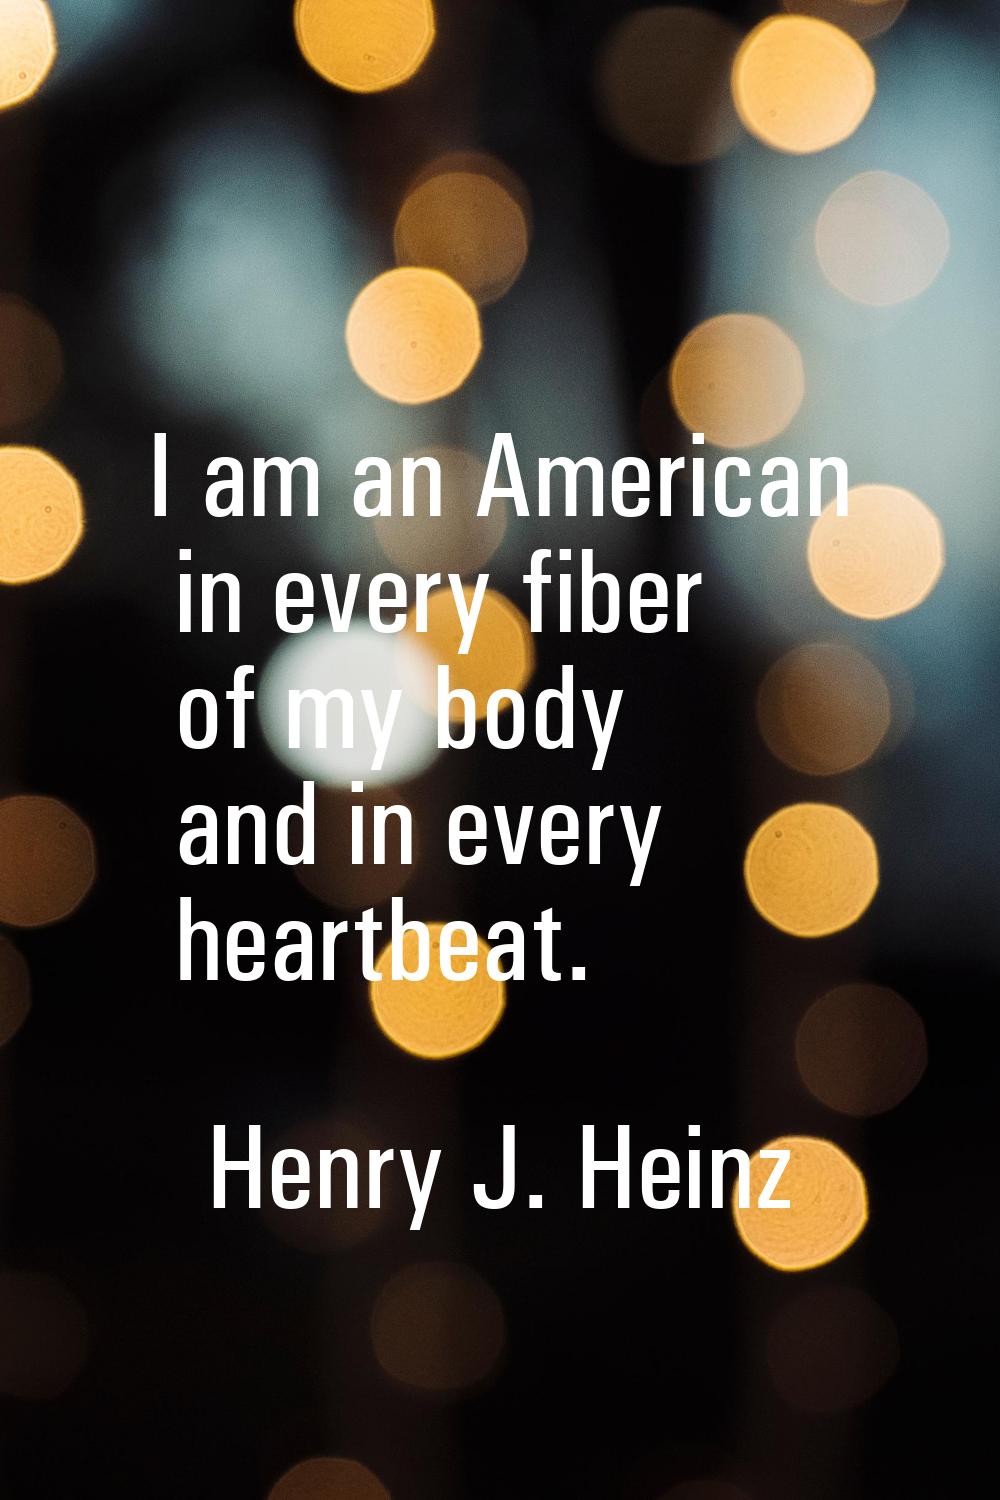 I am an American in every fiber of my body and in every heartbeat.